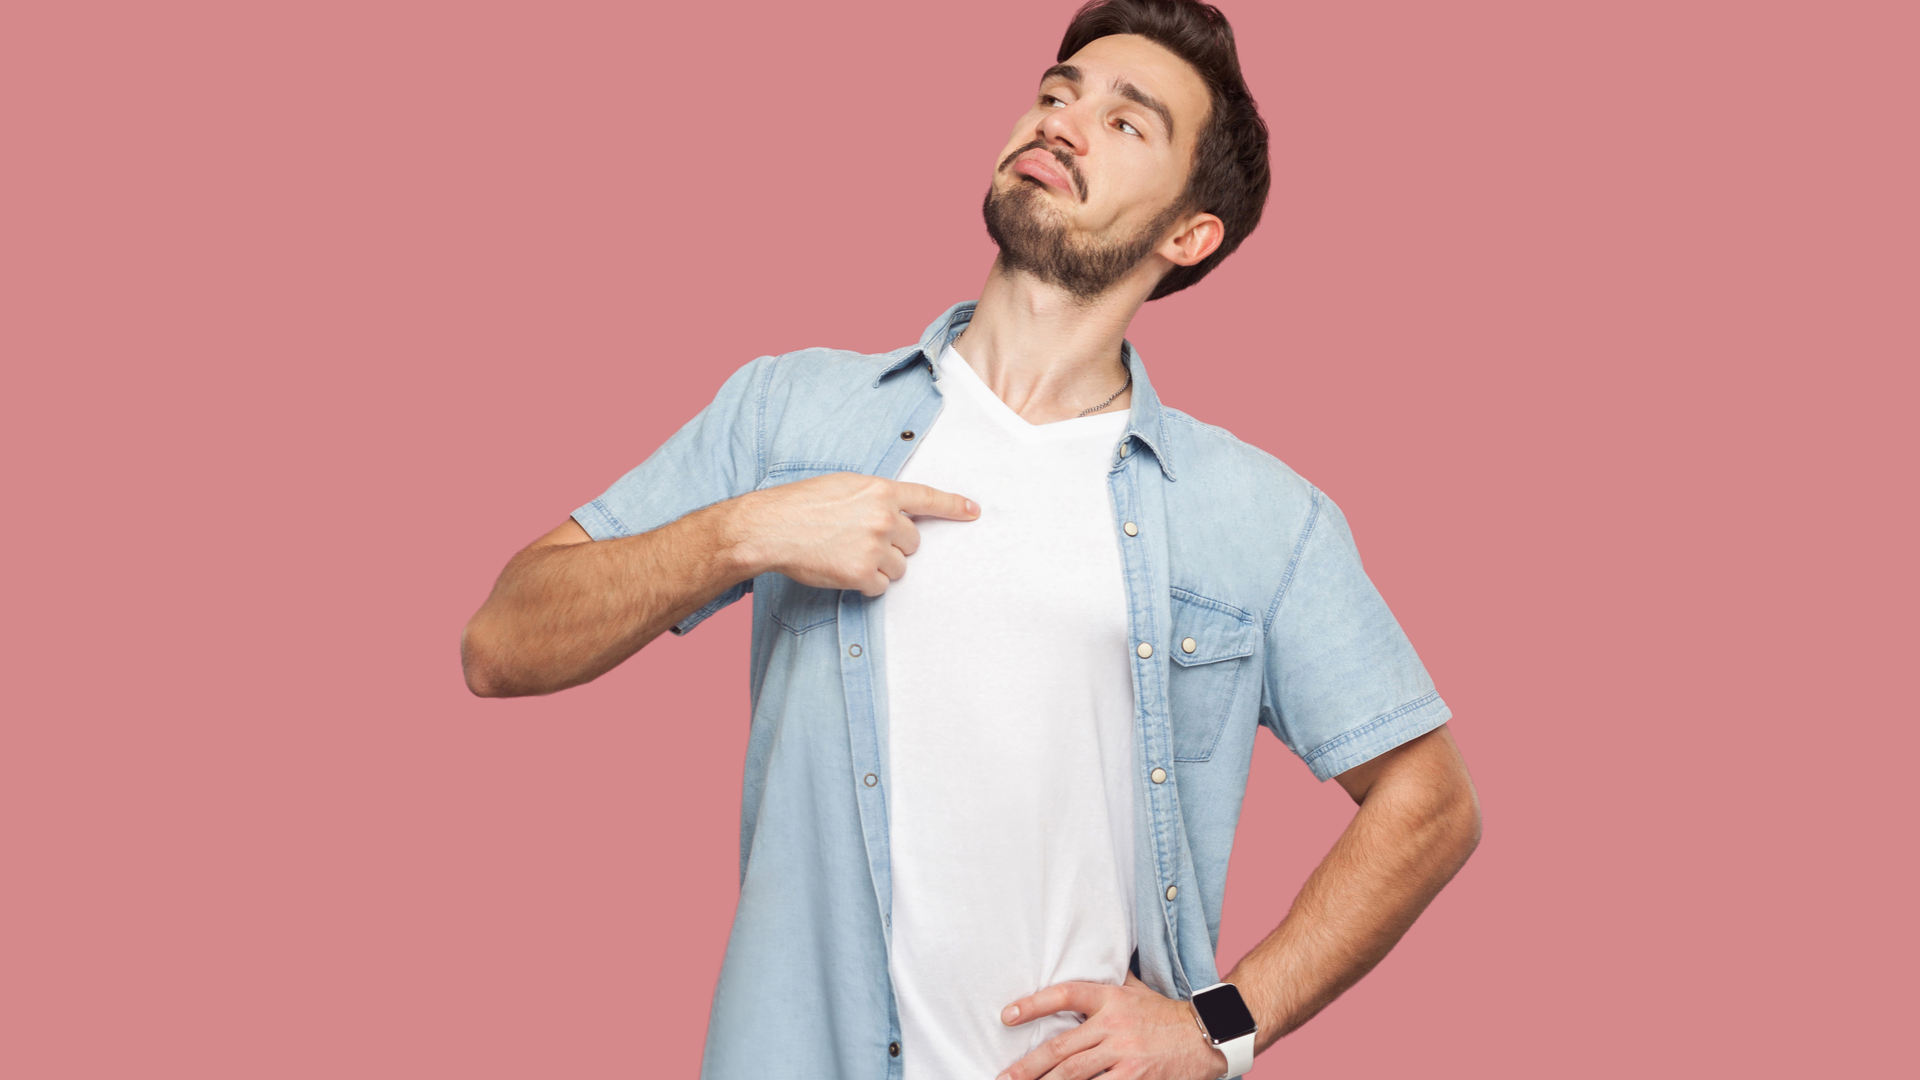 Brunette man in white t-shirt and jean over-shirt pointing at his chest and looking proud. Pink background.